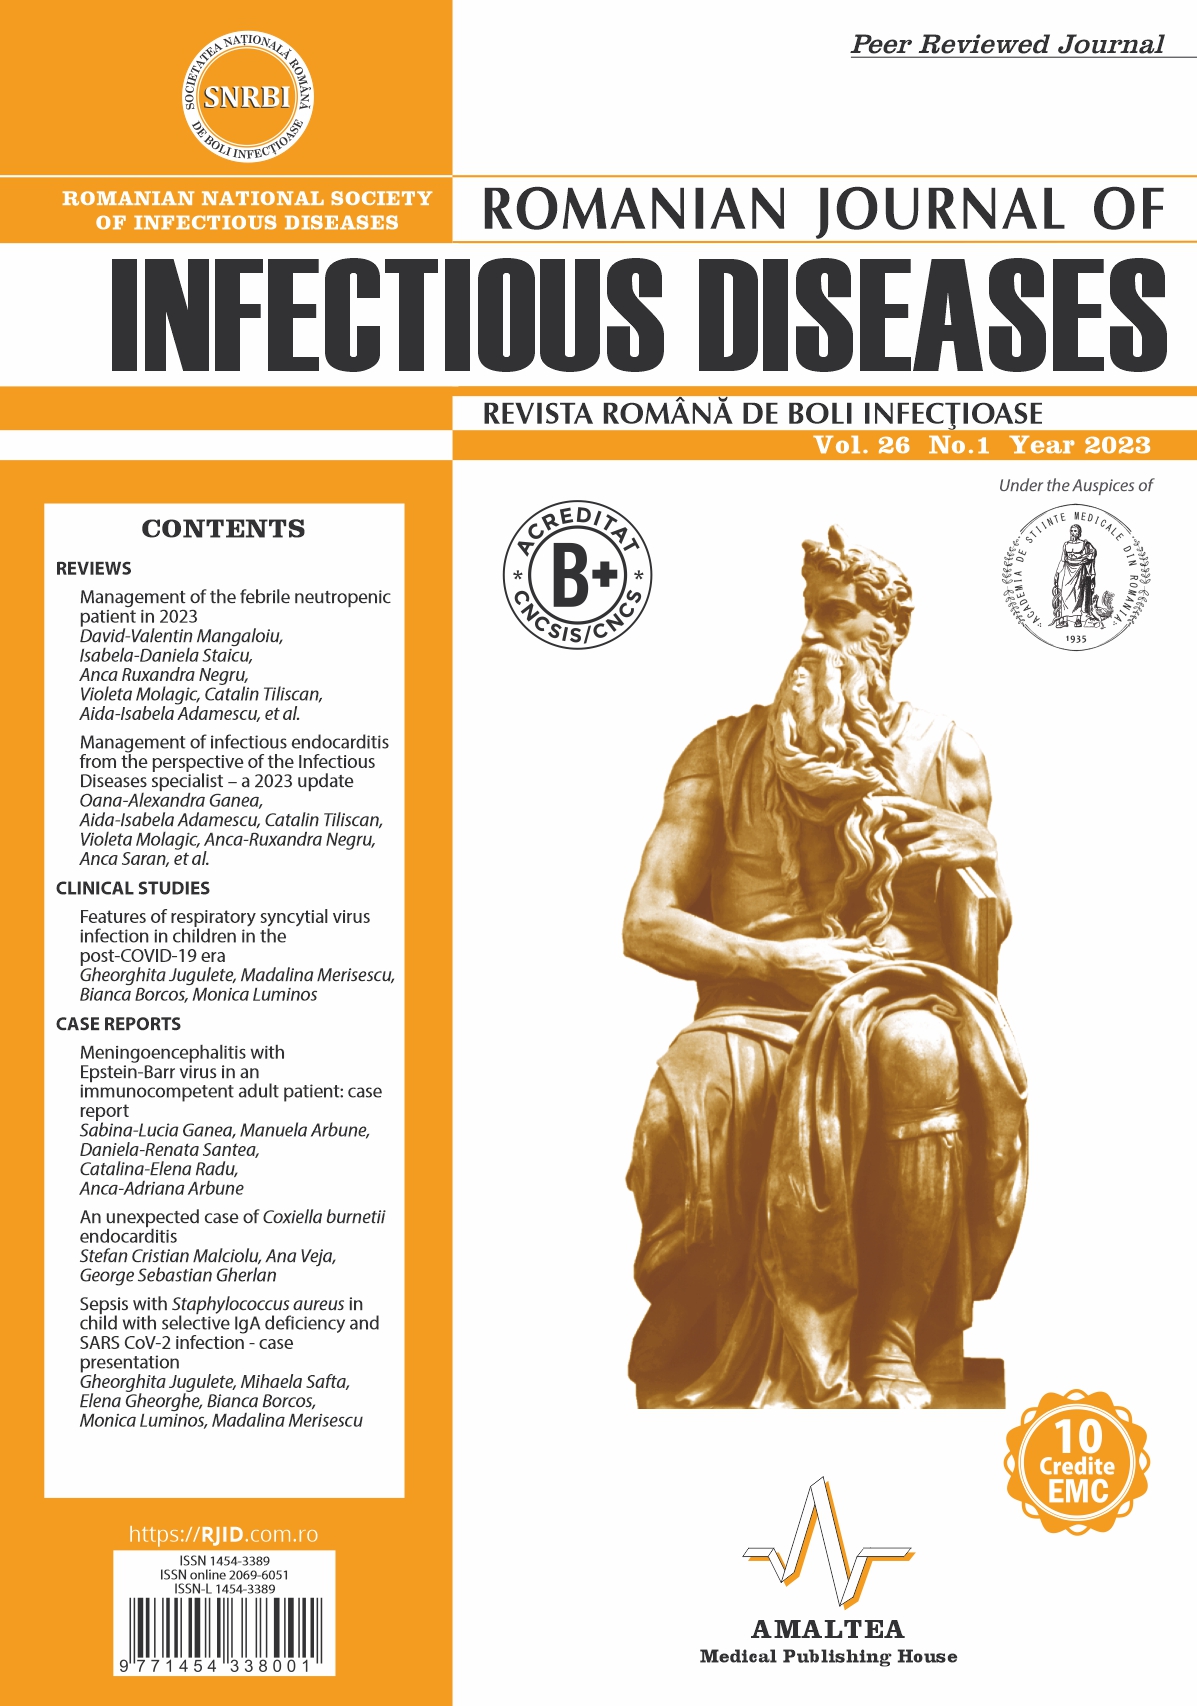 Romanian Journal of Infectious Diseases - Vol. 26, No. 1, 2023